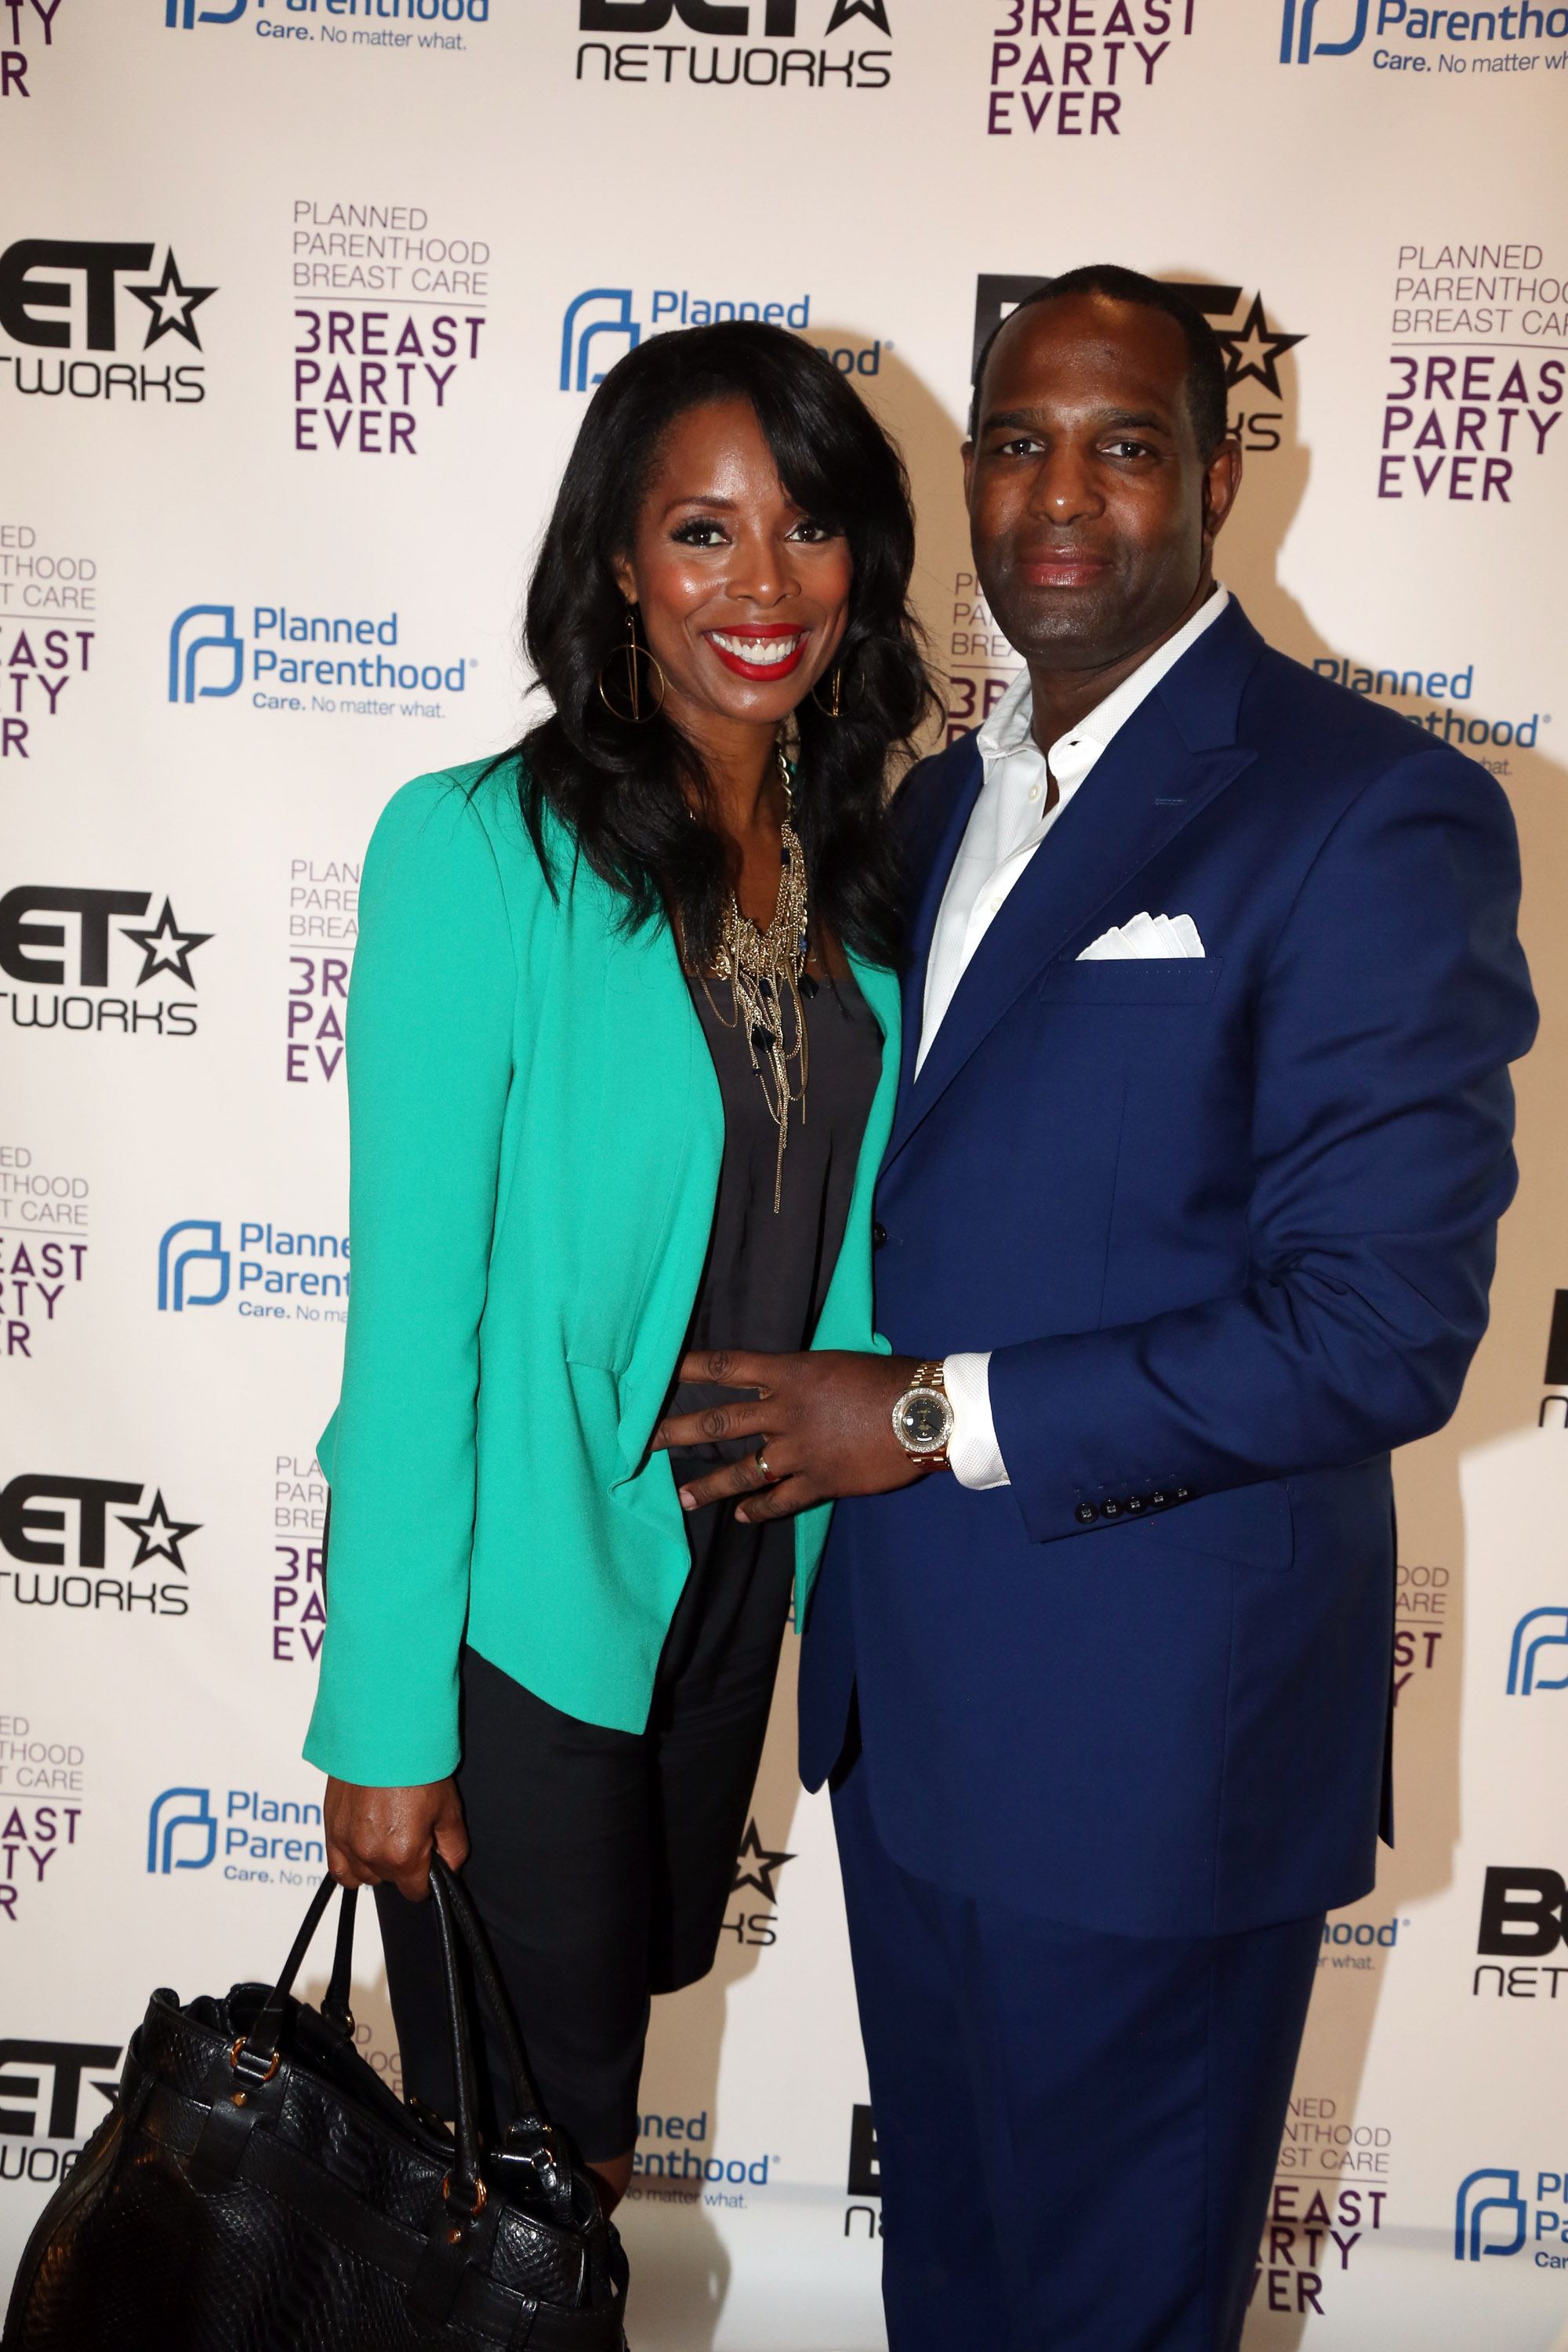 Tasha Smith and Keith Douglas at the Breast Party Ever at Ventanas on October 5, 2013, in Atlanta, Georgia. | Source: Getty Images